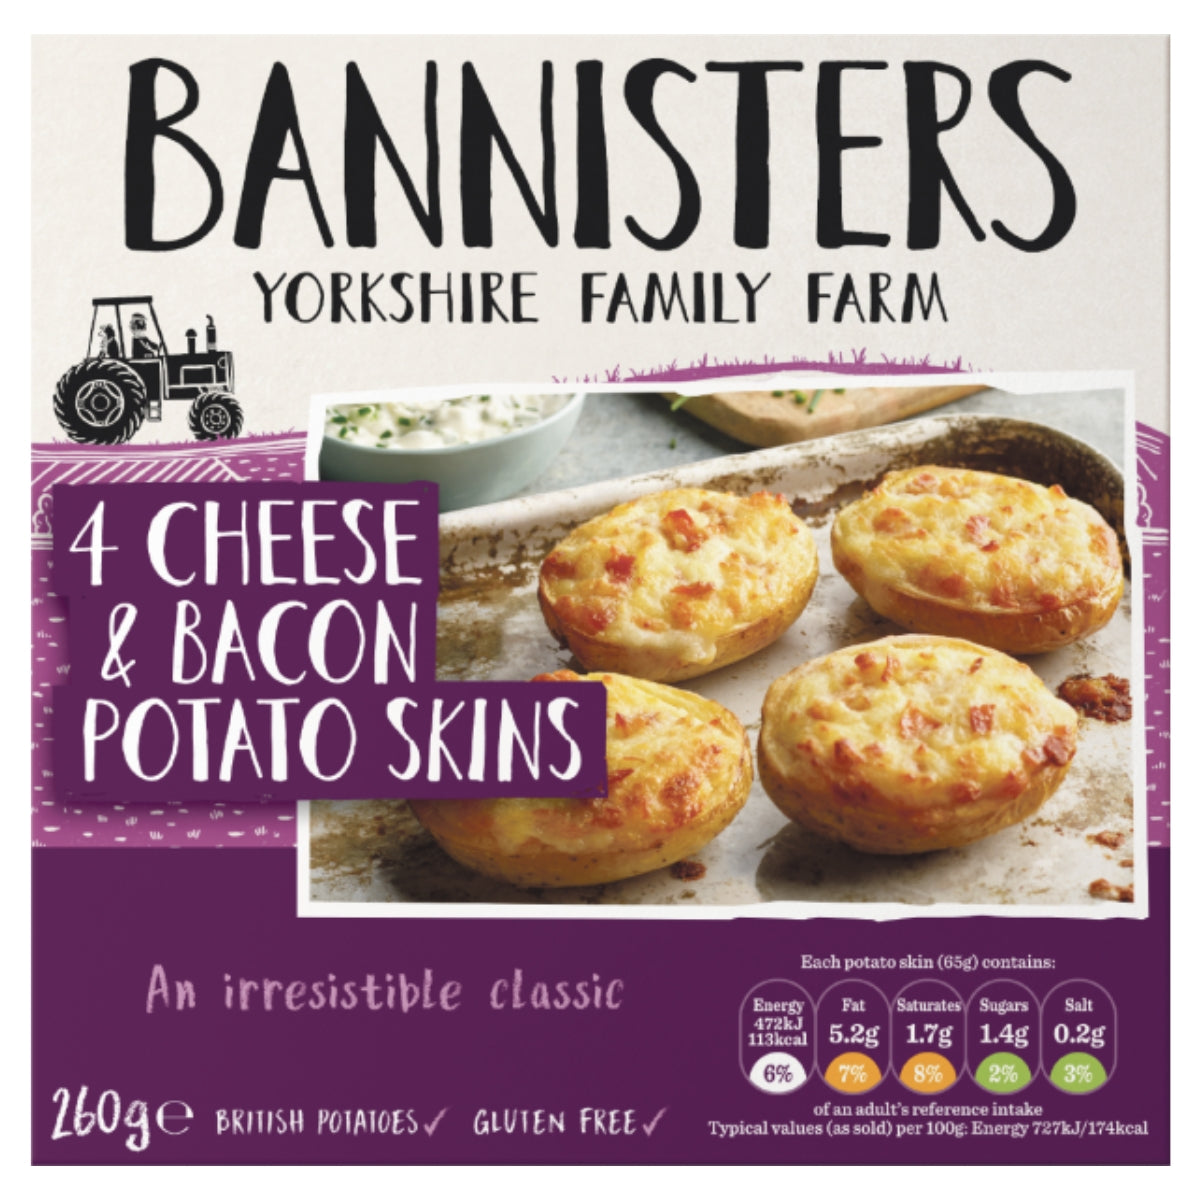 Bannisters 4 Cheese & Bacon Potato Skins - 260g.